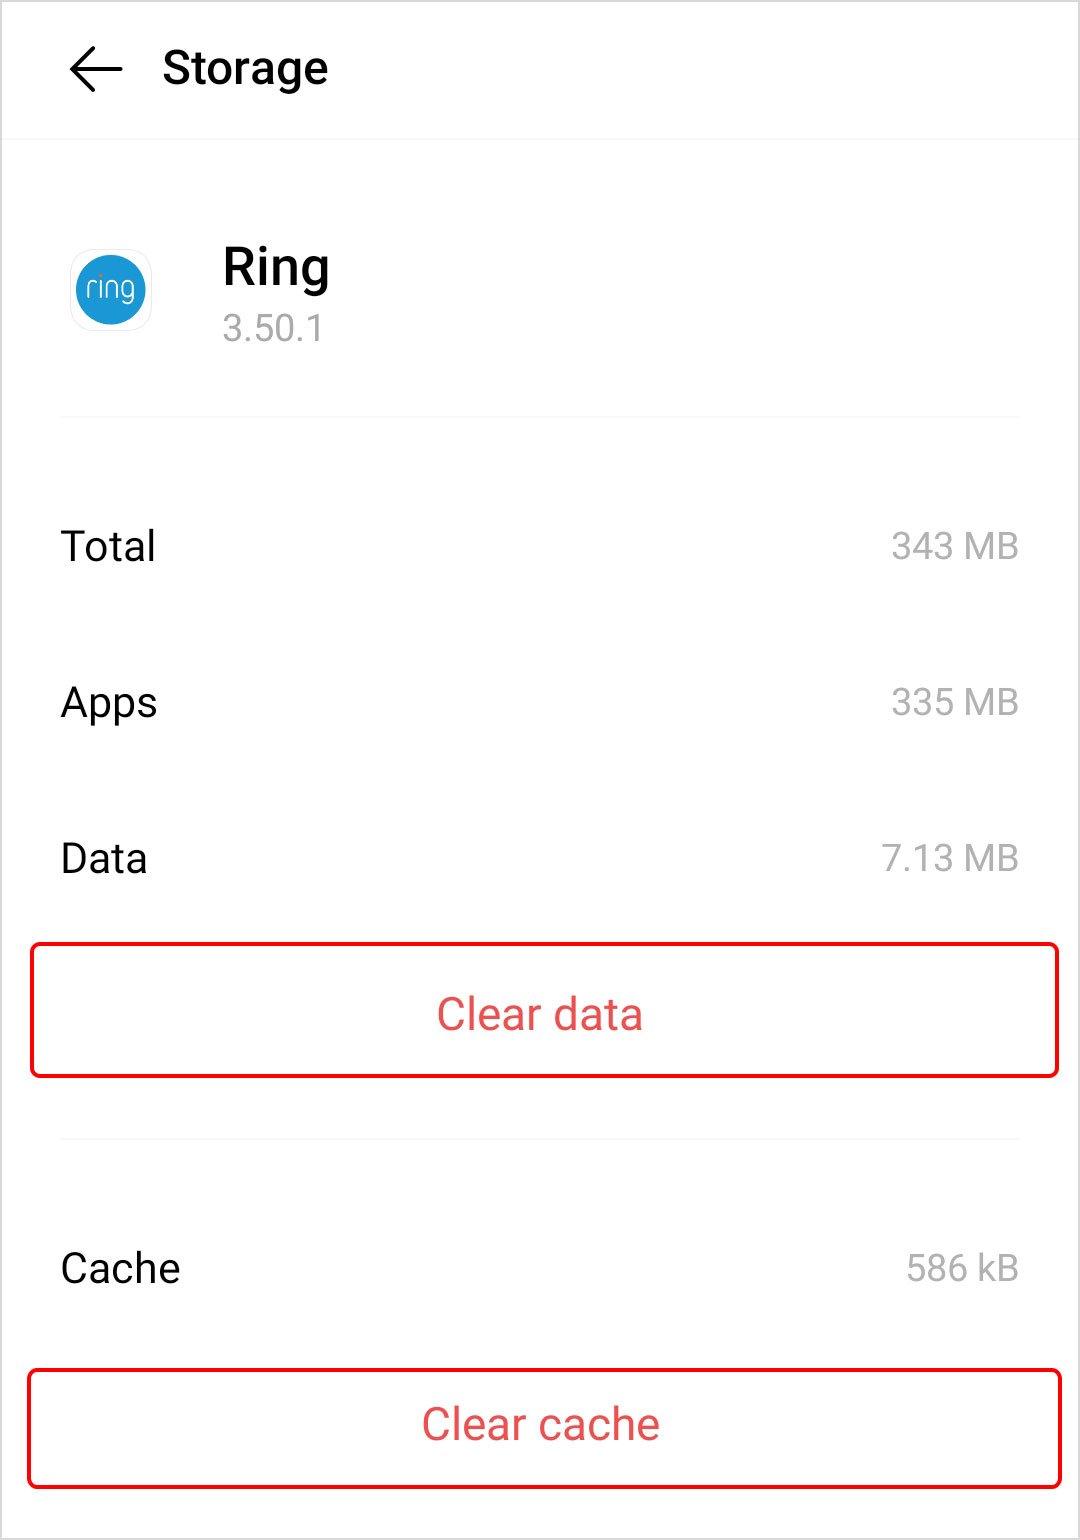 ring-app-clear-data-and-clear-cache